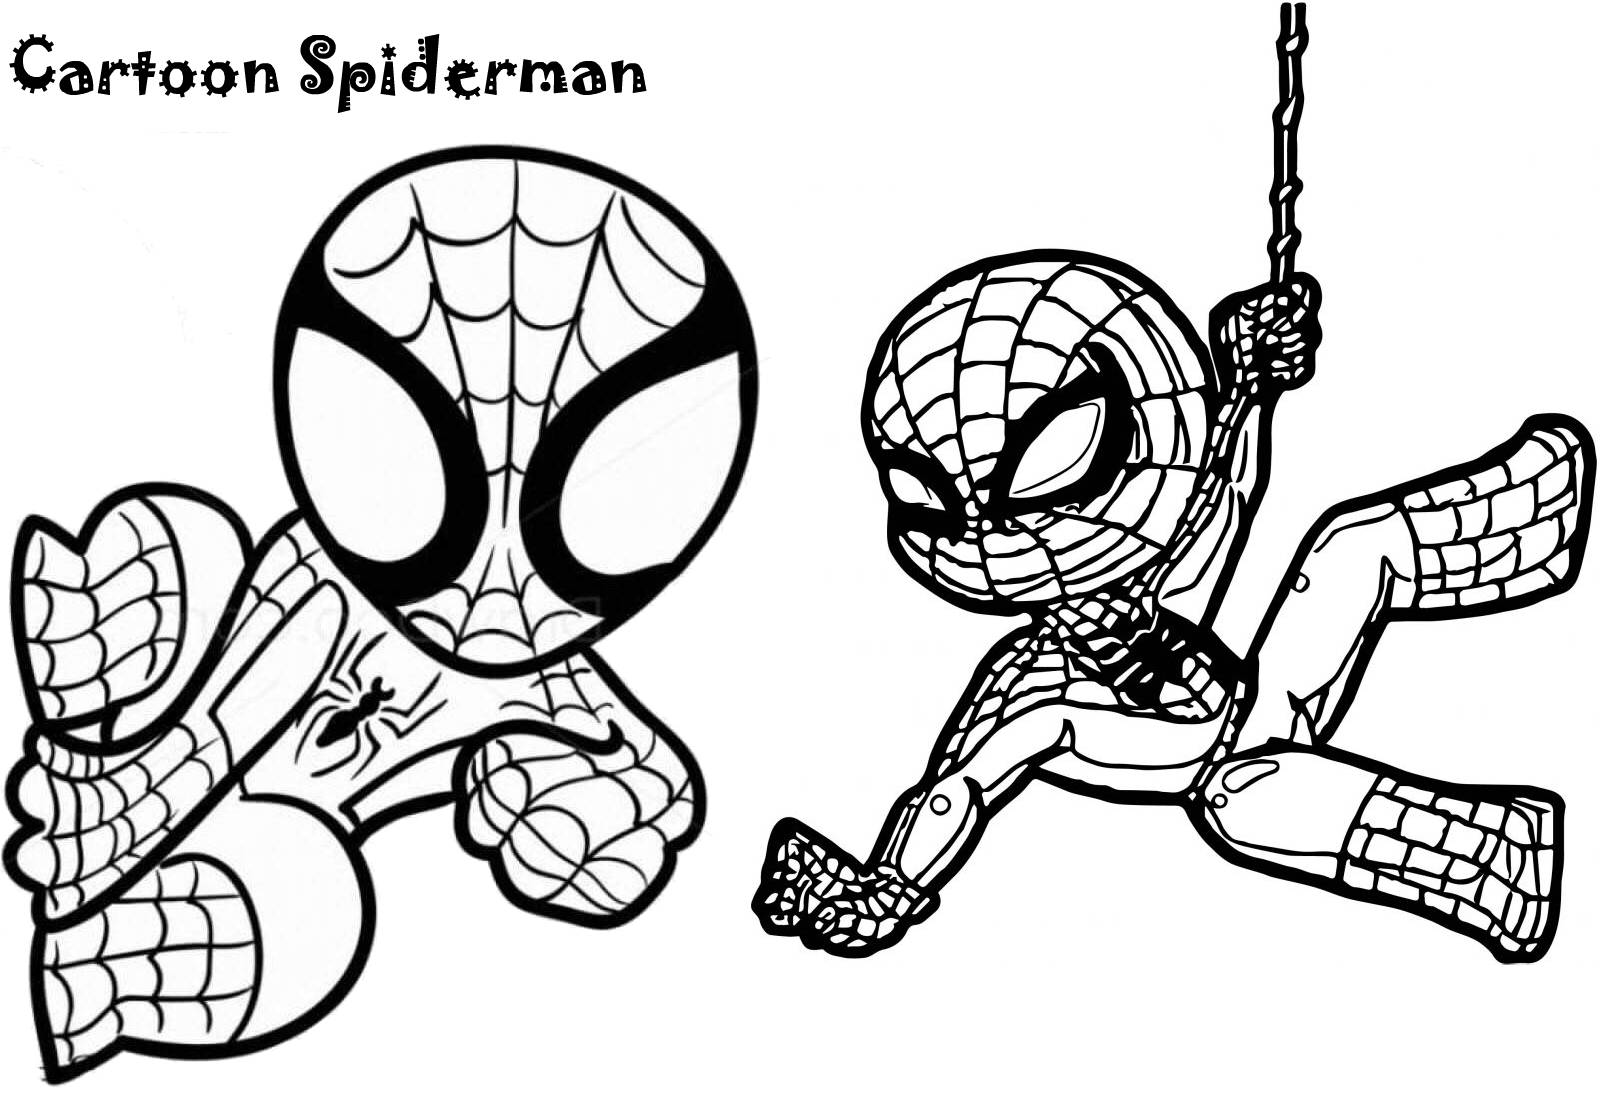 Gorgeous Spider-man coloring book for 5 year olds